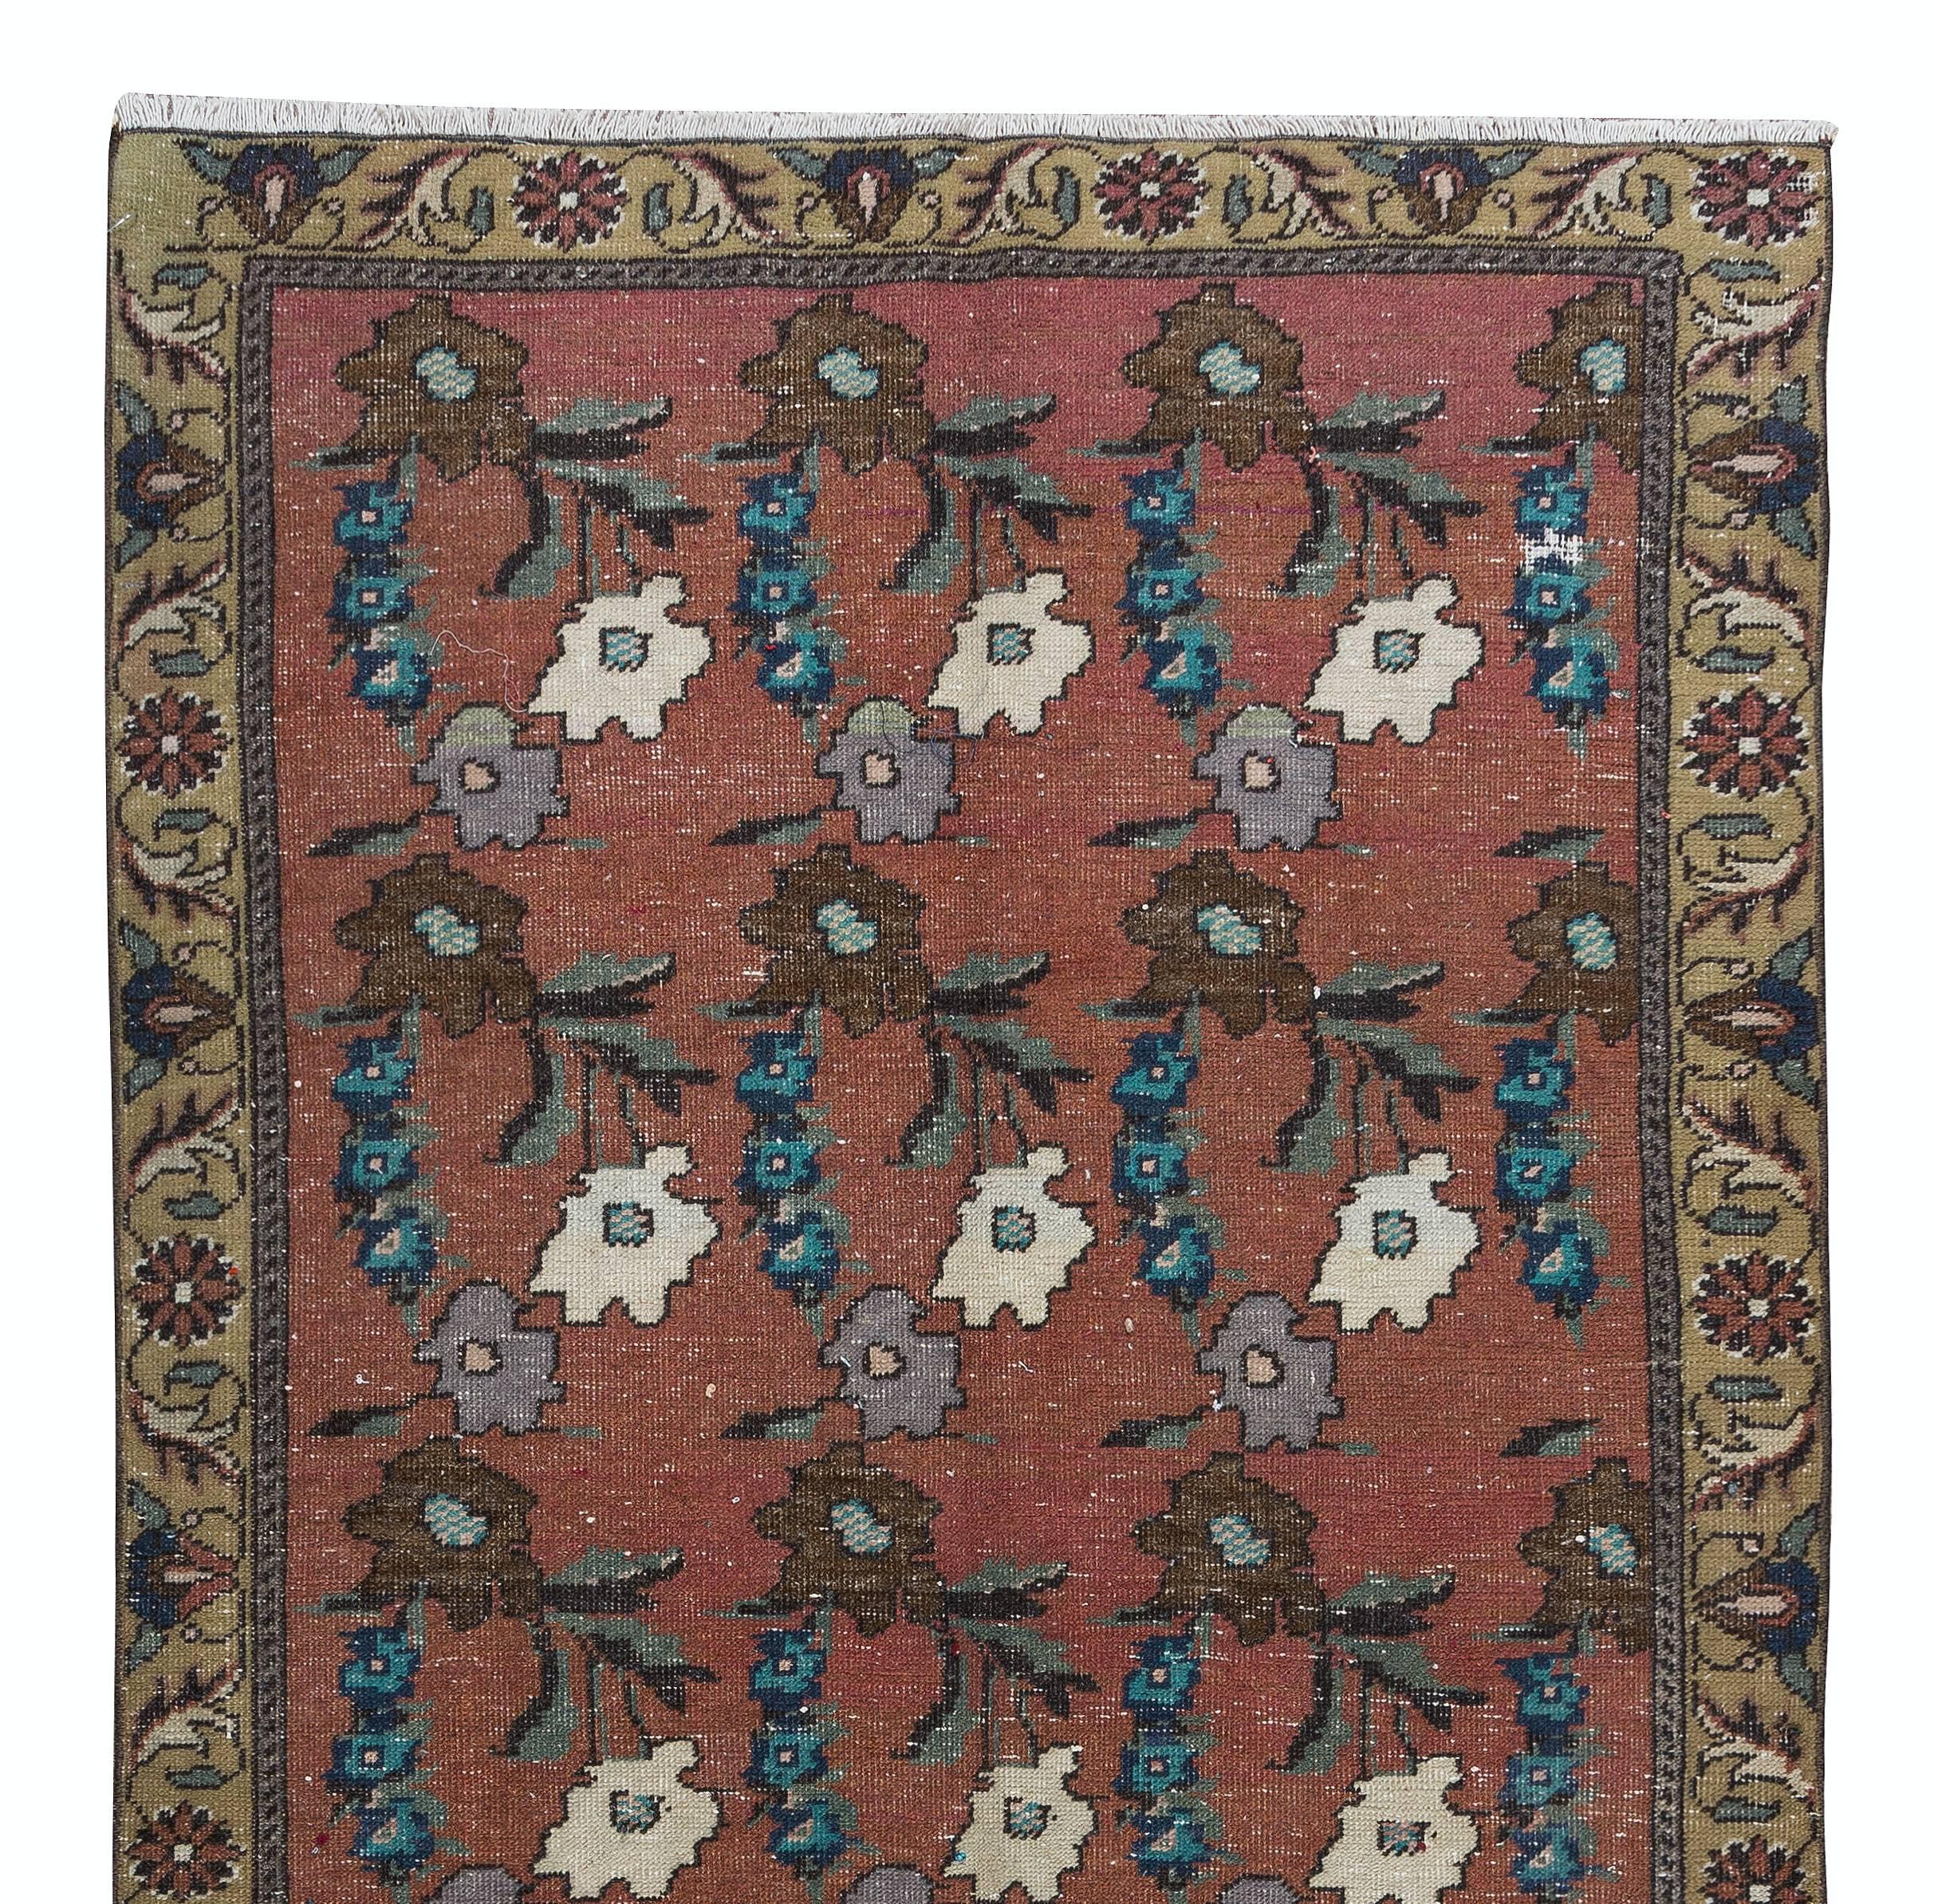 Hand-Woven 3.9x8.4 Ft Vintage Handmade Floral Pattern Turkish Rug in Red, Blue & Beige For Sale